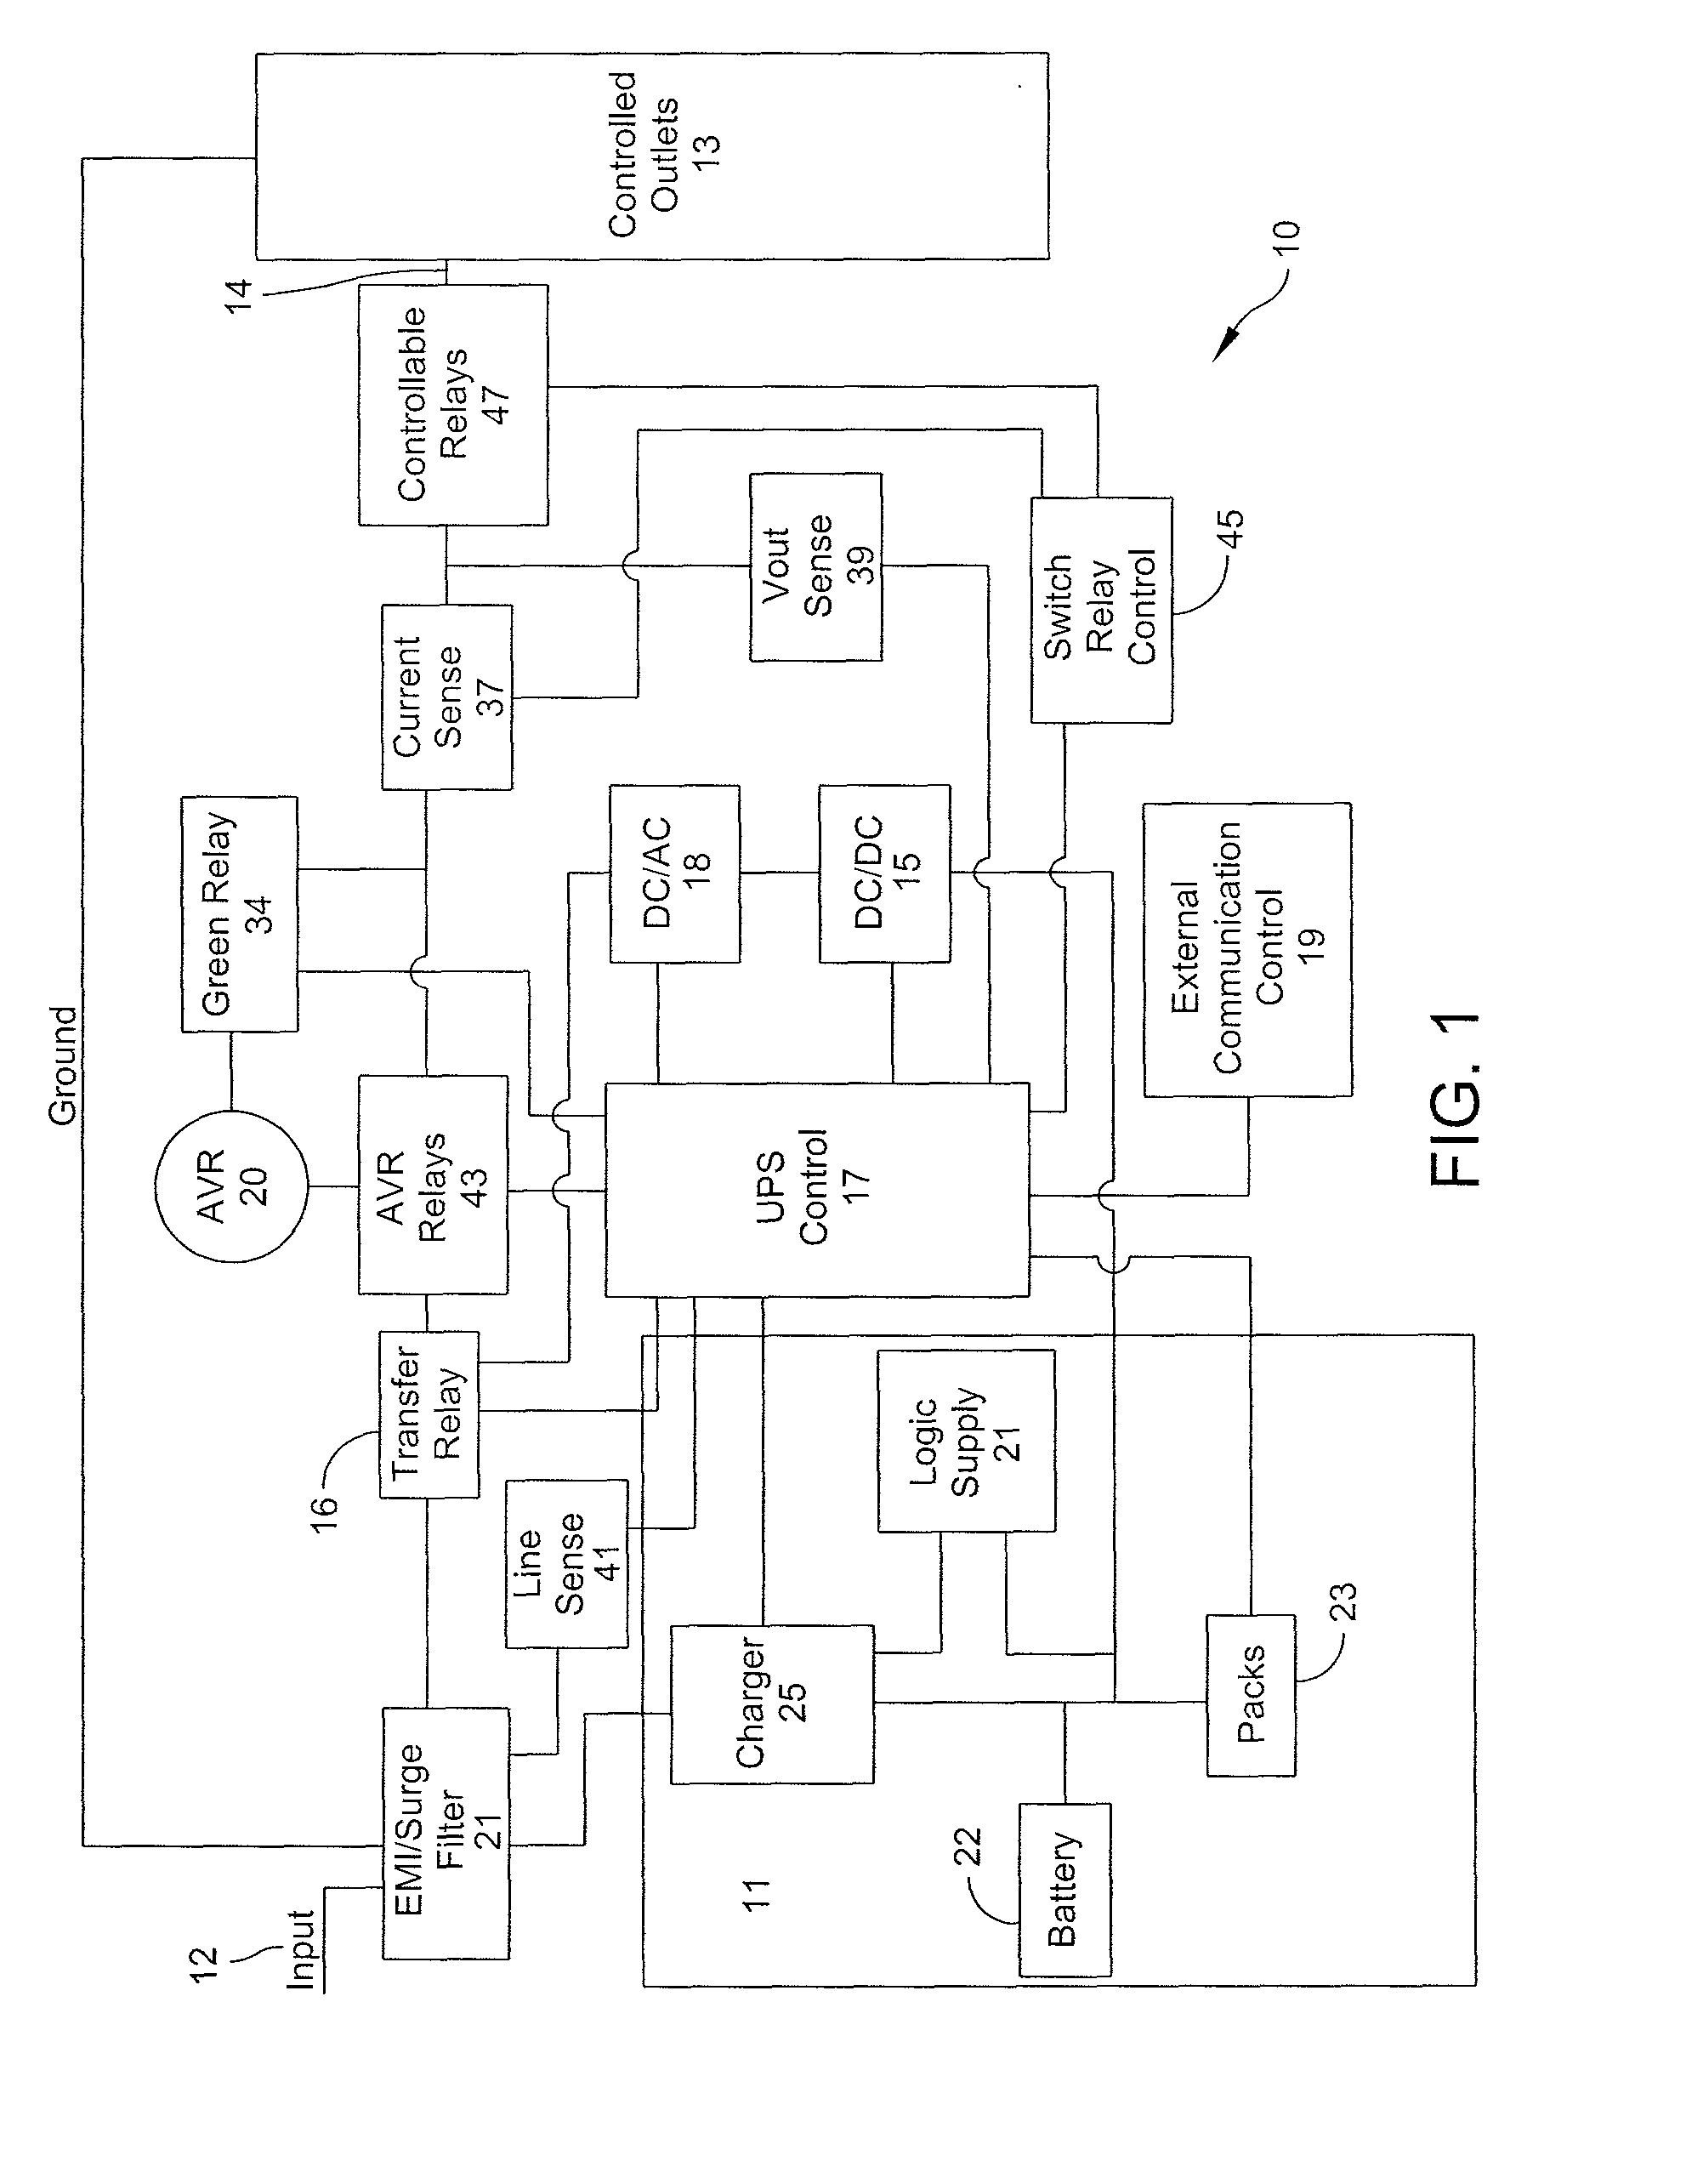 System and method for limiting losses in an uninterruptible power supply